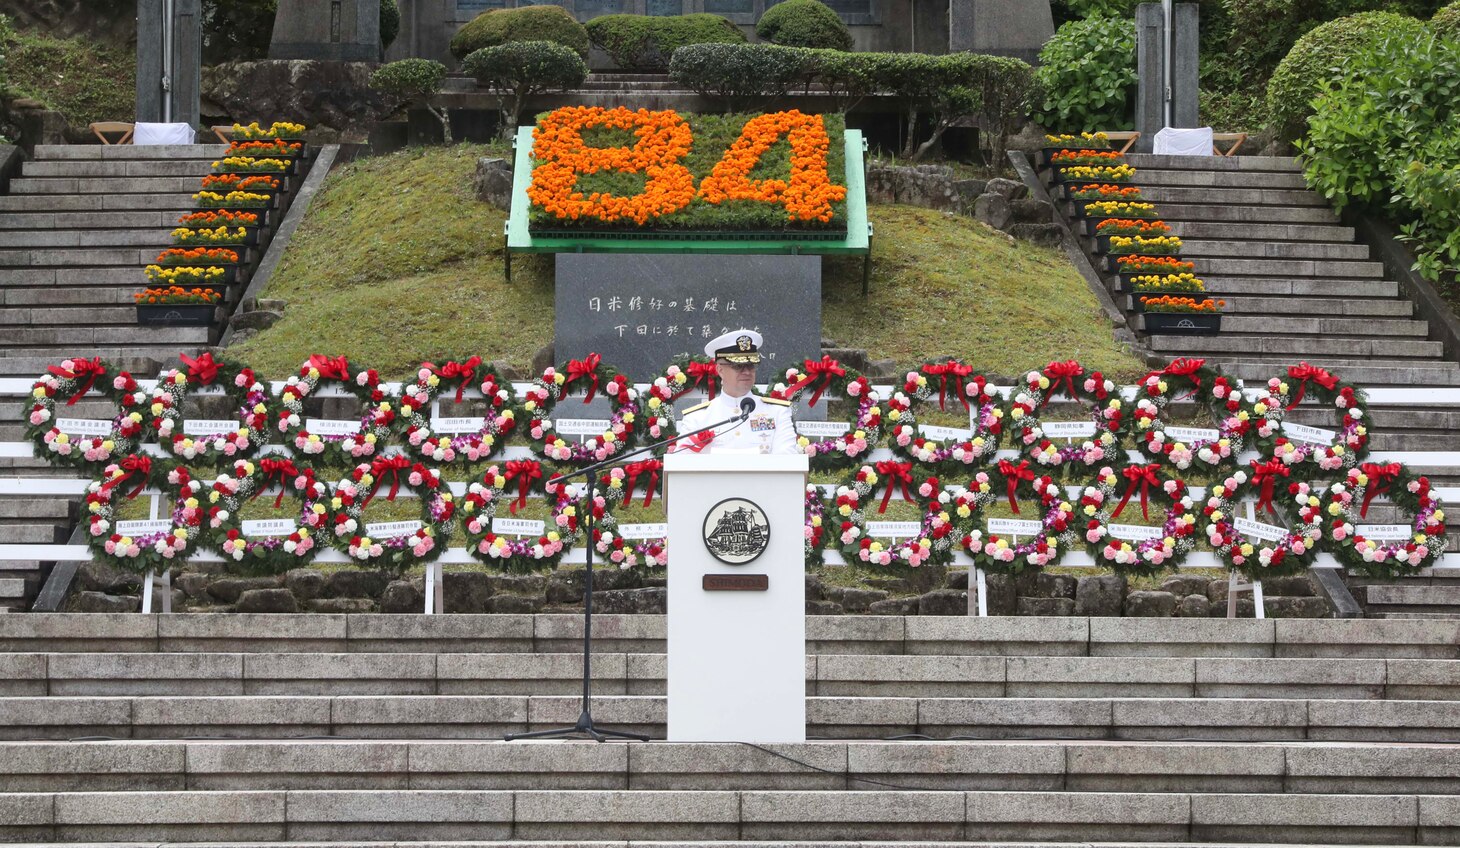 Rear Adm. Carl Lahti, commander, Naval Forces Japan, speaks during the official ceremony for the 84th Black Ship Festival, May 20. The Black Ship Festival is held annually in Shimoda to commemorate the arrival of Commodore Matthew Perry to Japan in 1853, a historical event that marked the beginning of diplomacy and trade agreements between the U.S. and Japan.